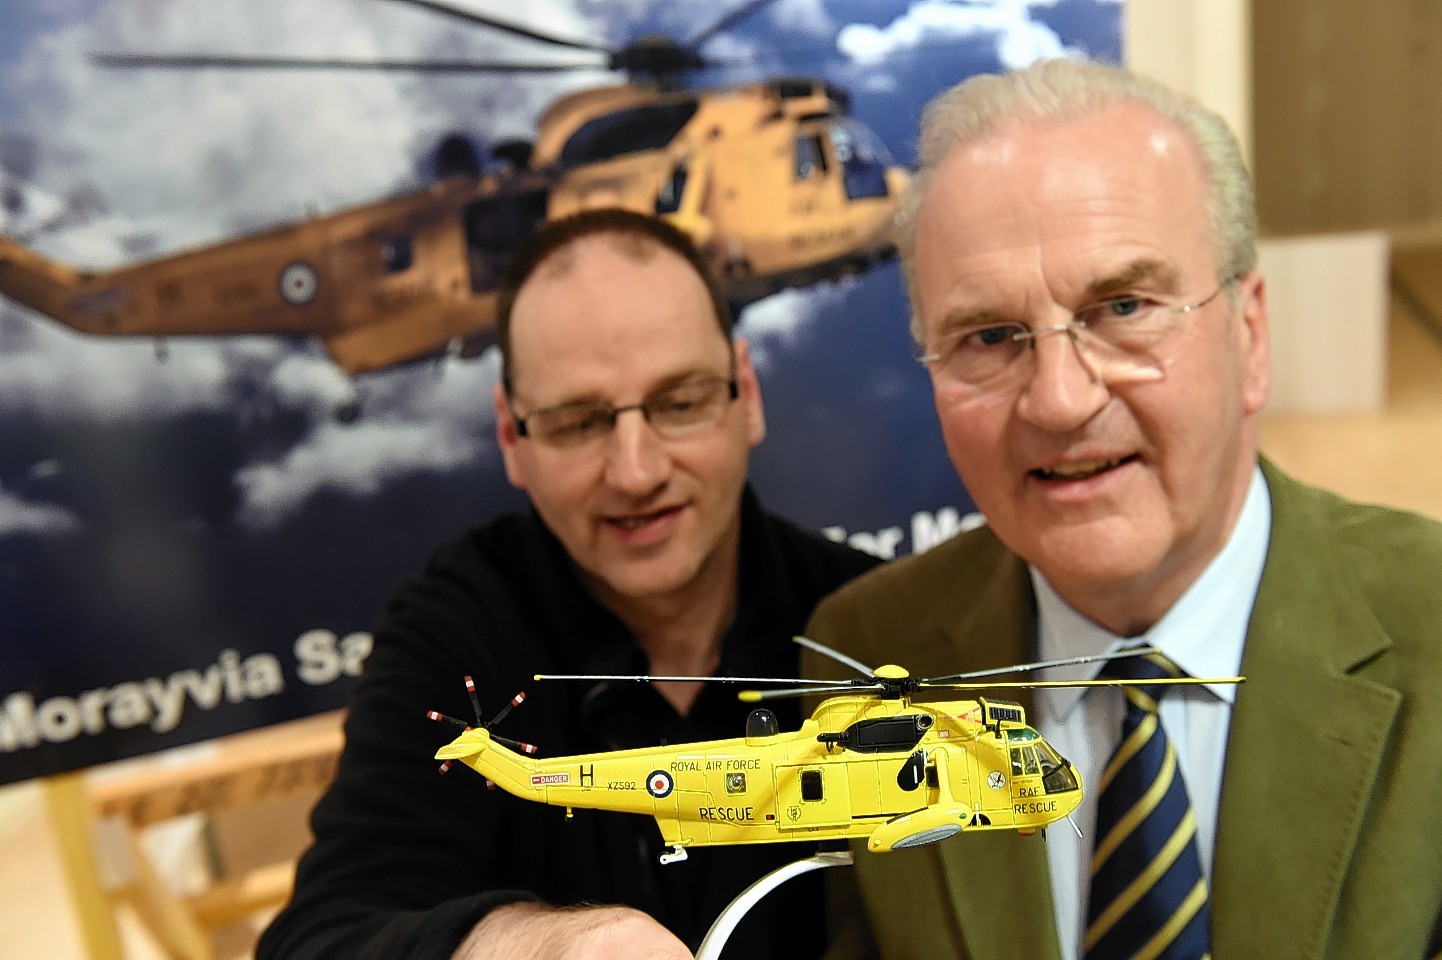 Morayvia announce the successful purchase of a SAR Seaking helicopter